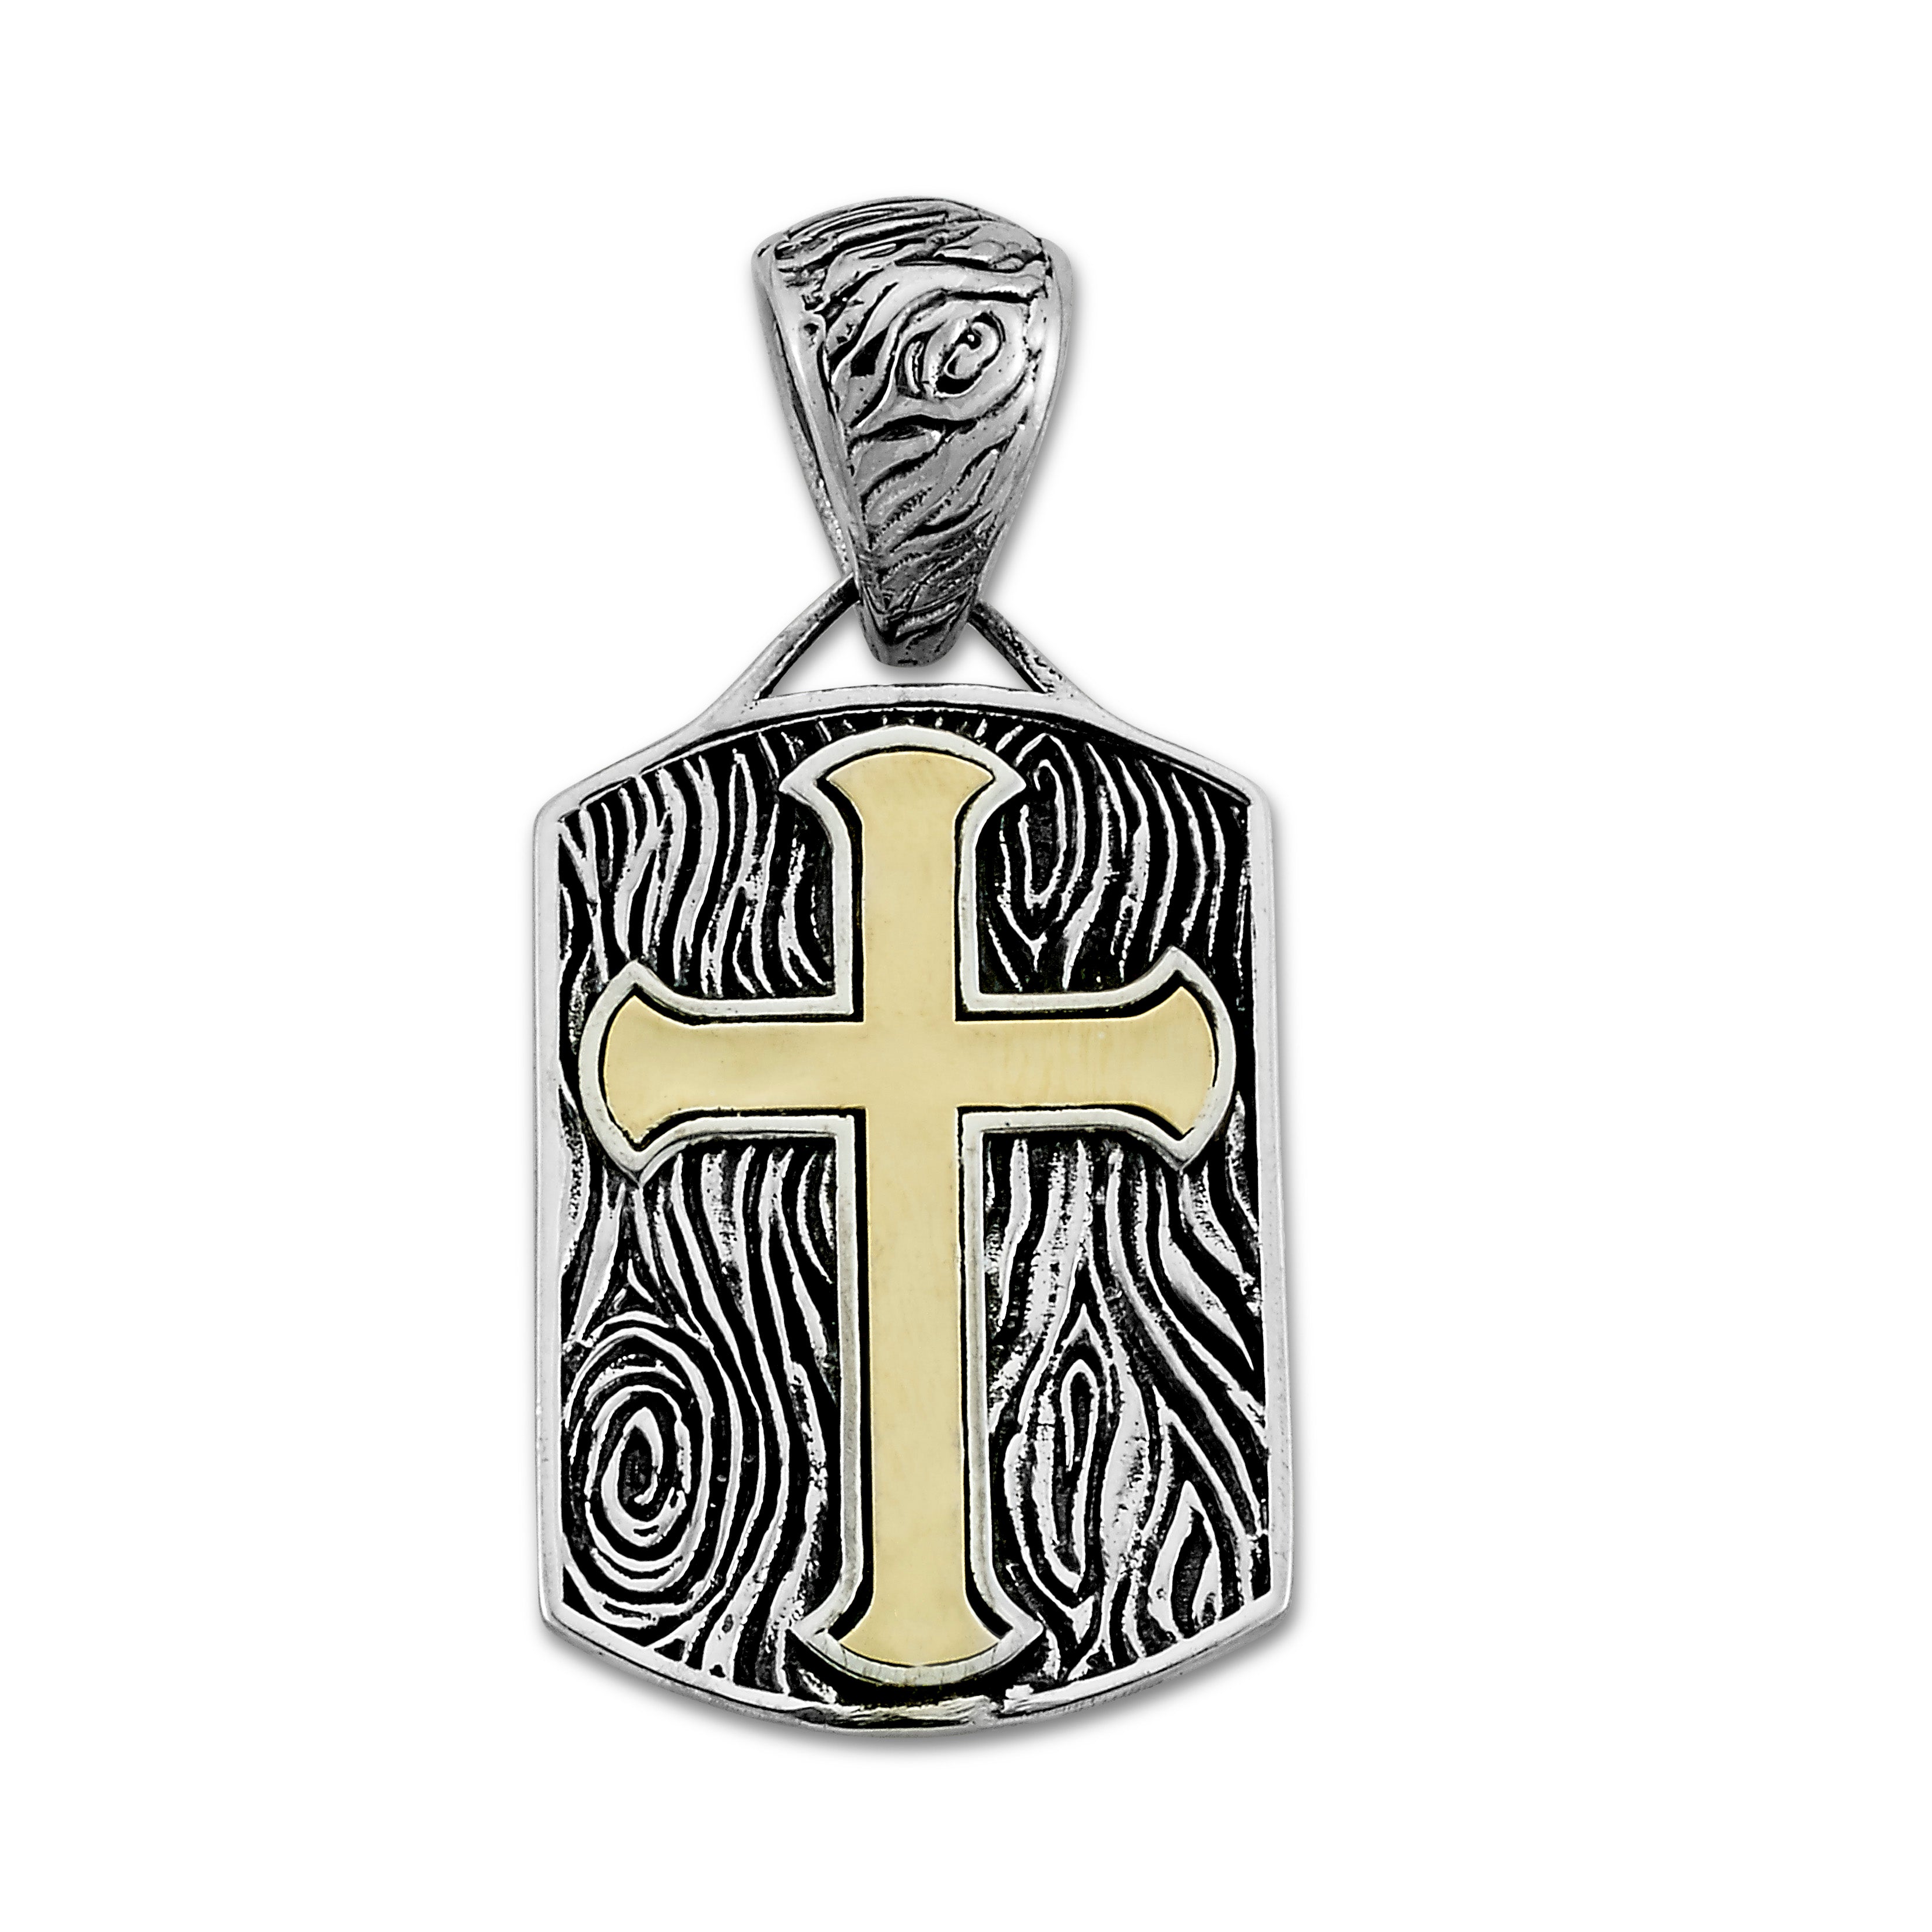 Samuel B Sterling Silver and 18K Yellow Gold Woodgrain Cross Dogtag Pendant. Handcrafted in Bali by our skilled artisans. Each creation in the Imperial Bali™ Men’s Collections draws its power from mystic dragons, yet bows in reverence to nature and ancient Balinese patterns, weaves and textures.